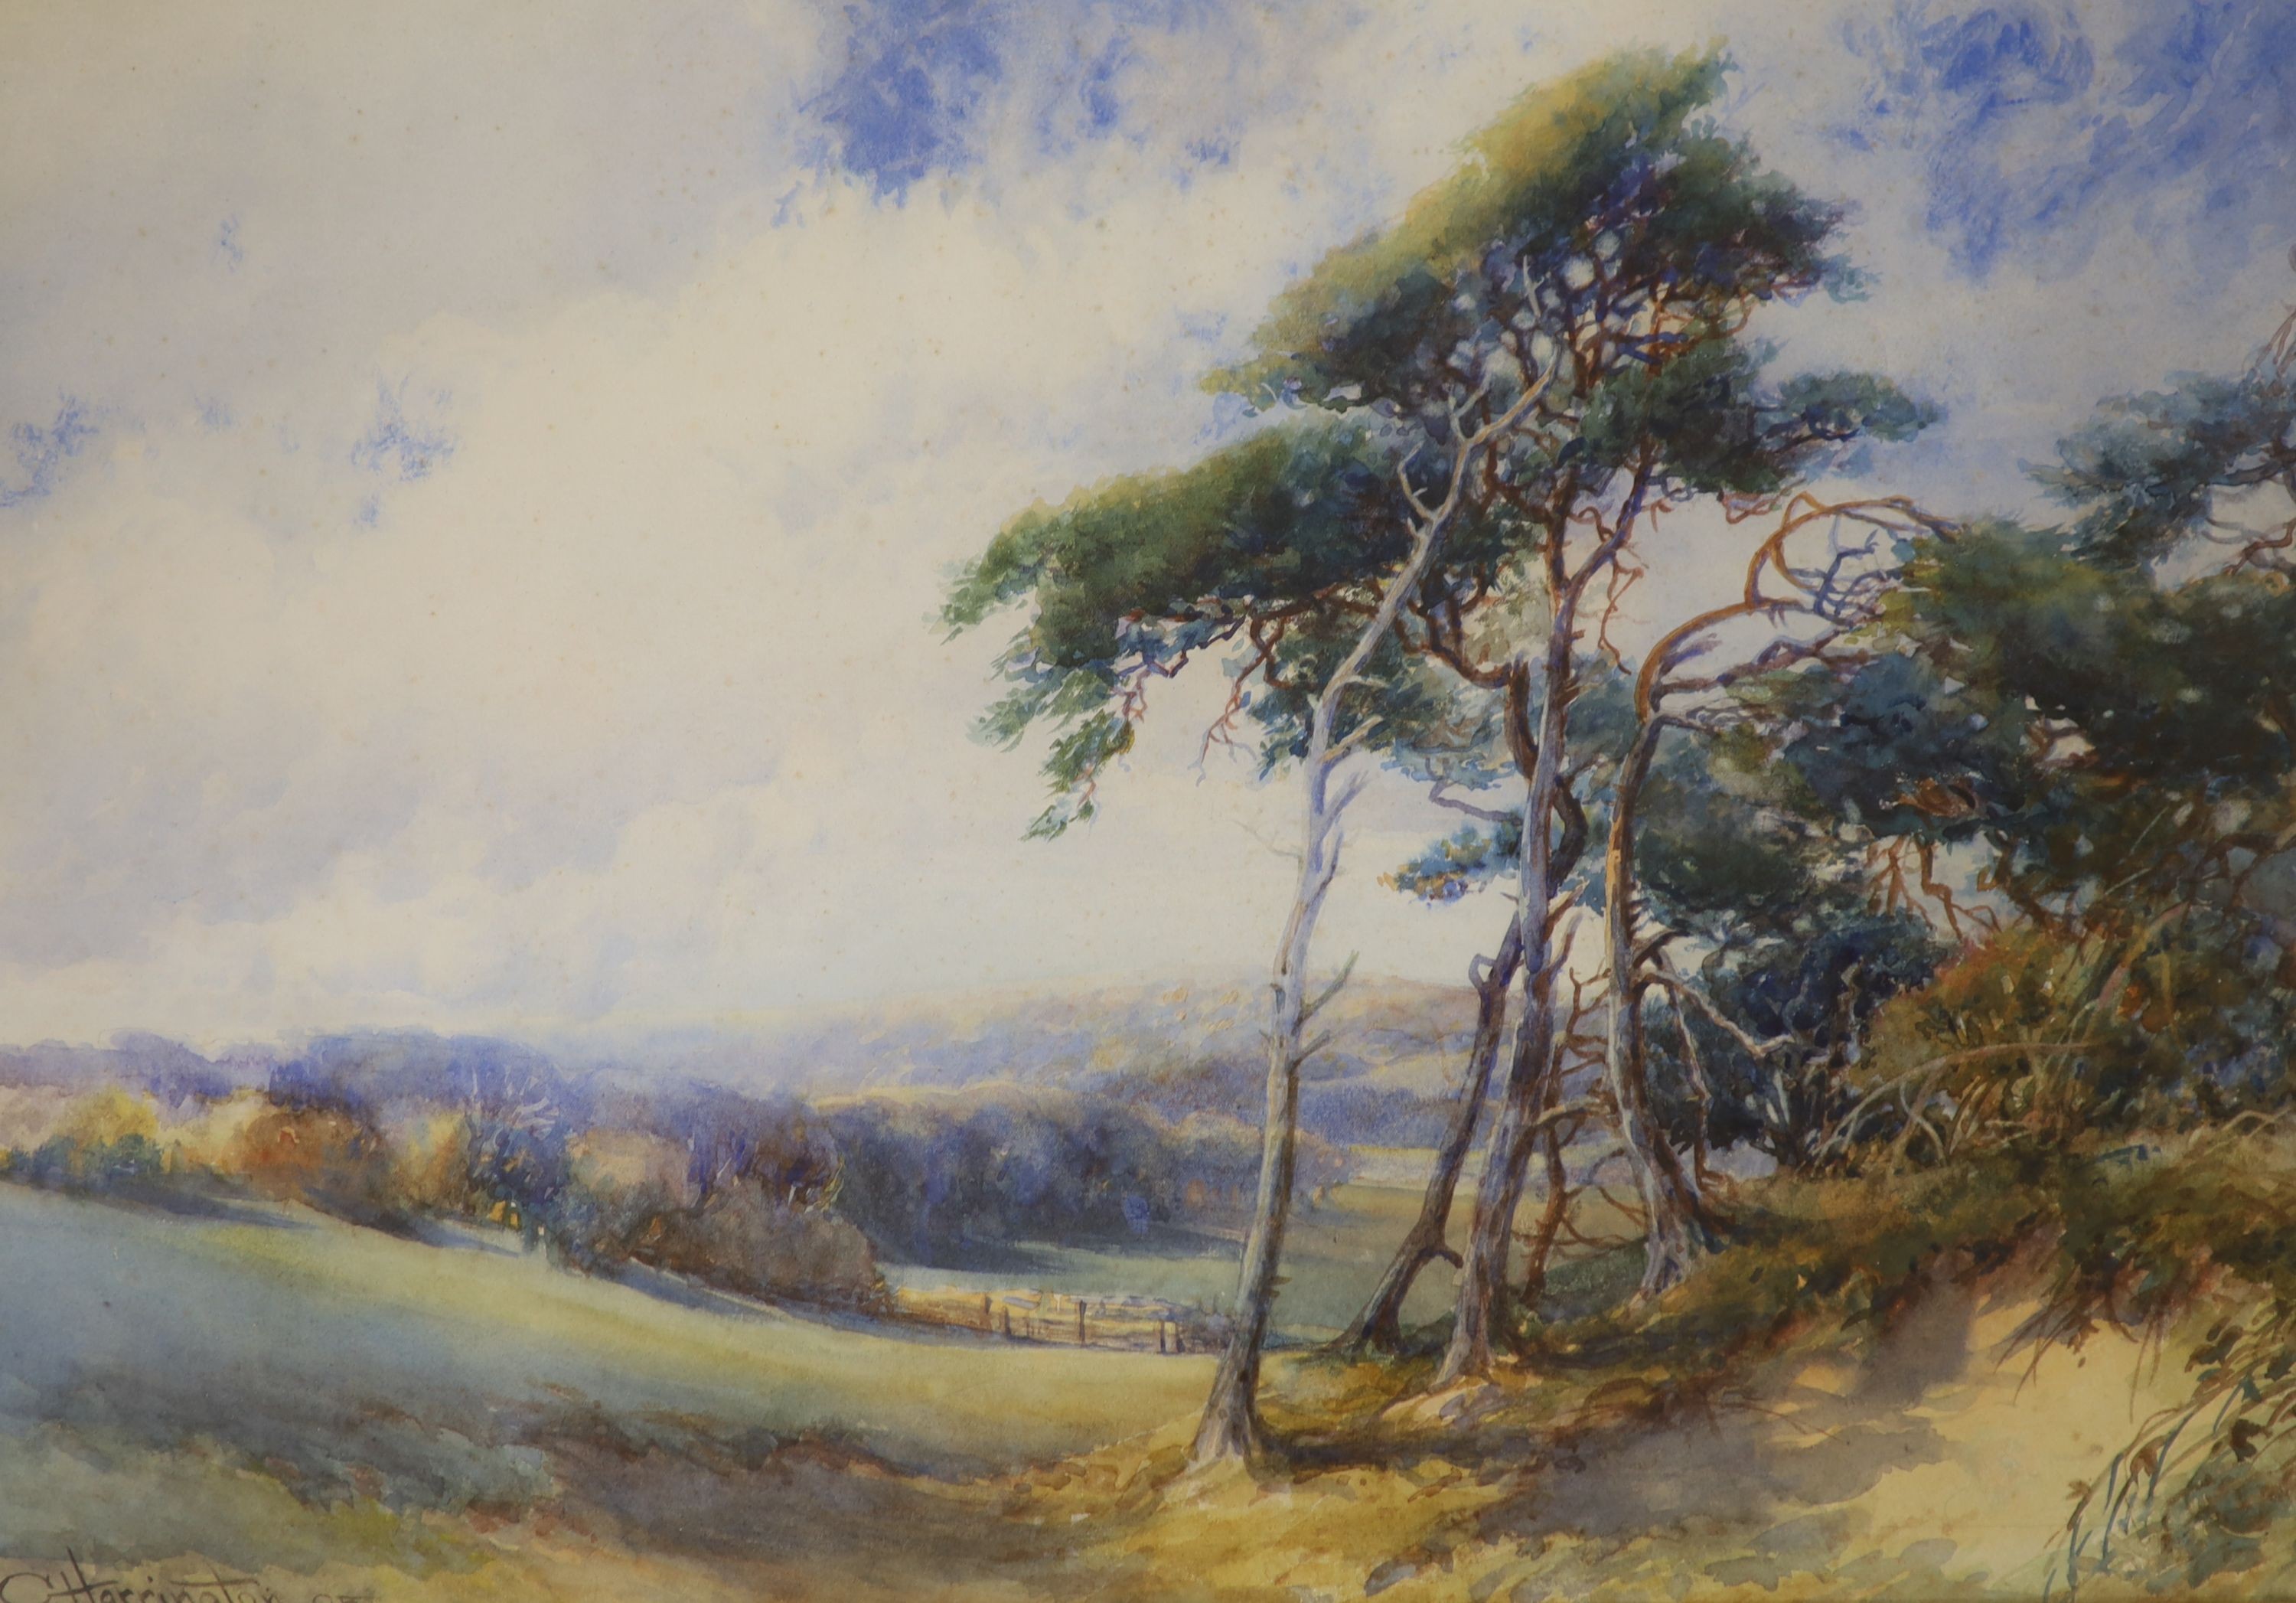 Charles Harrington (1865-1943), watercolour, landscape with Pinetrees in the foreground, sign 44 x 62 cm.